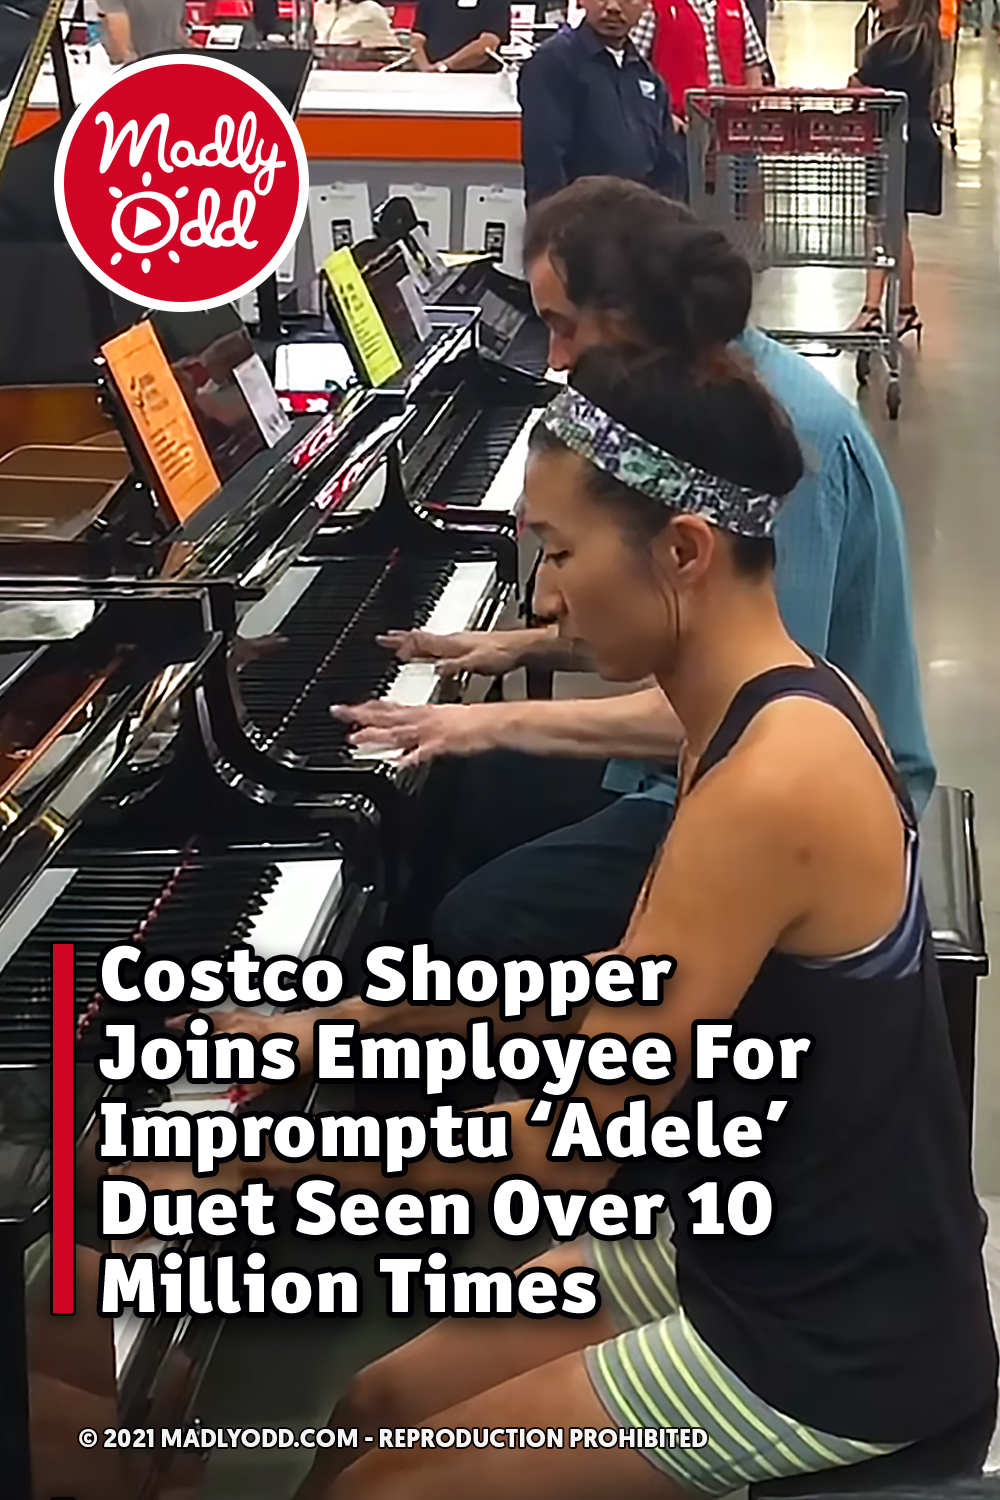 Costco Shopper Joins Employee For Impromptu \'Adele\' Duet Seen Over 10 Million Times